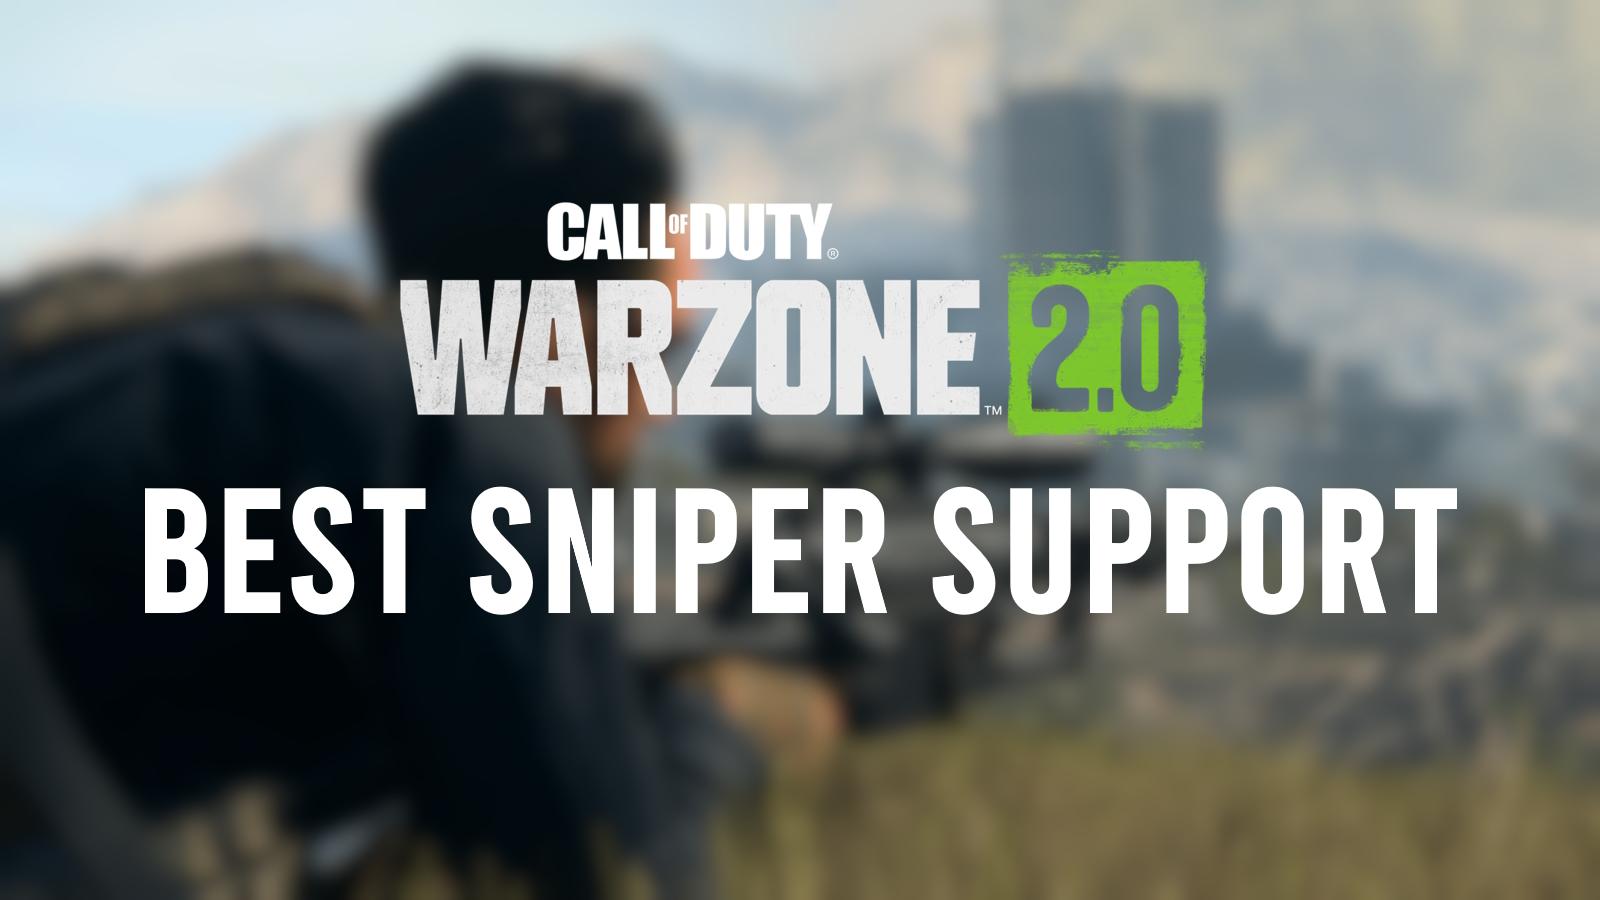 best warzone 2 sniper support loadout title overlaid on top of sniper in call of duty.